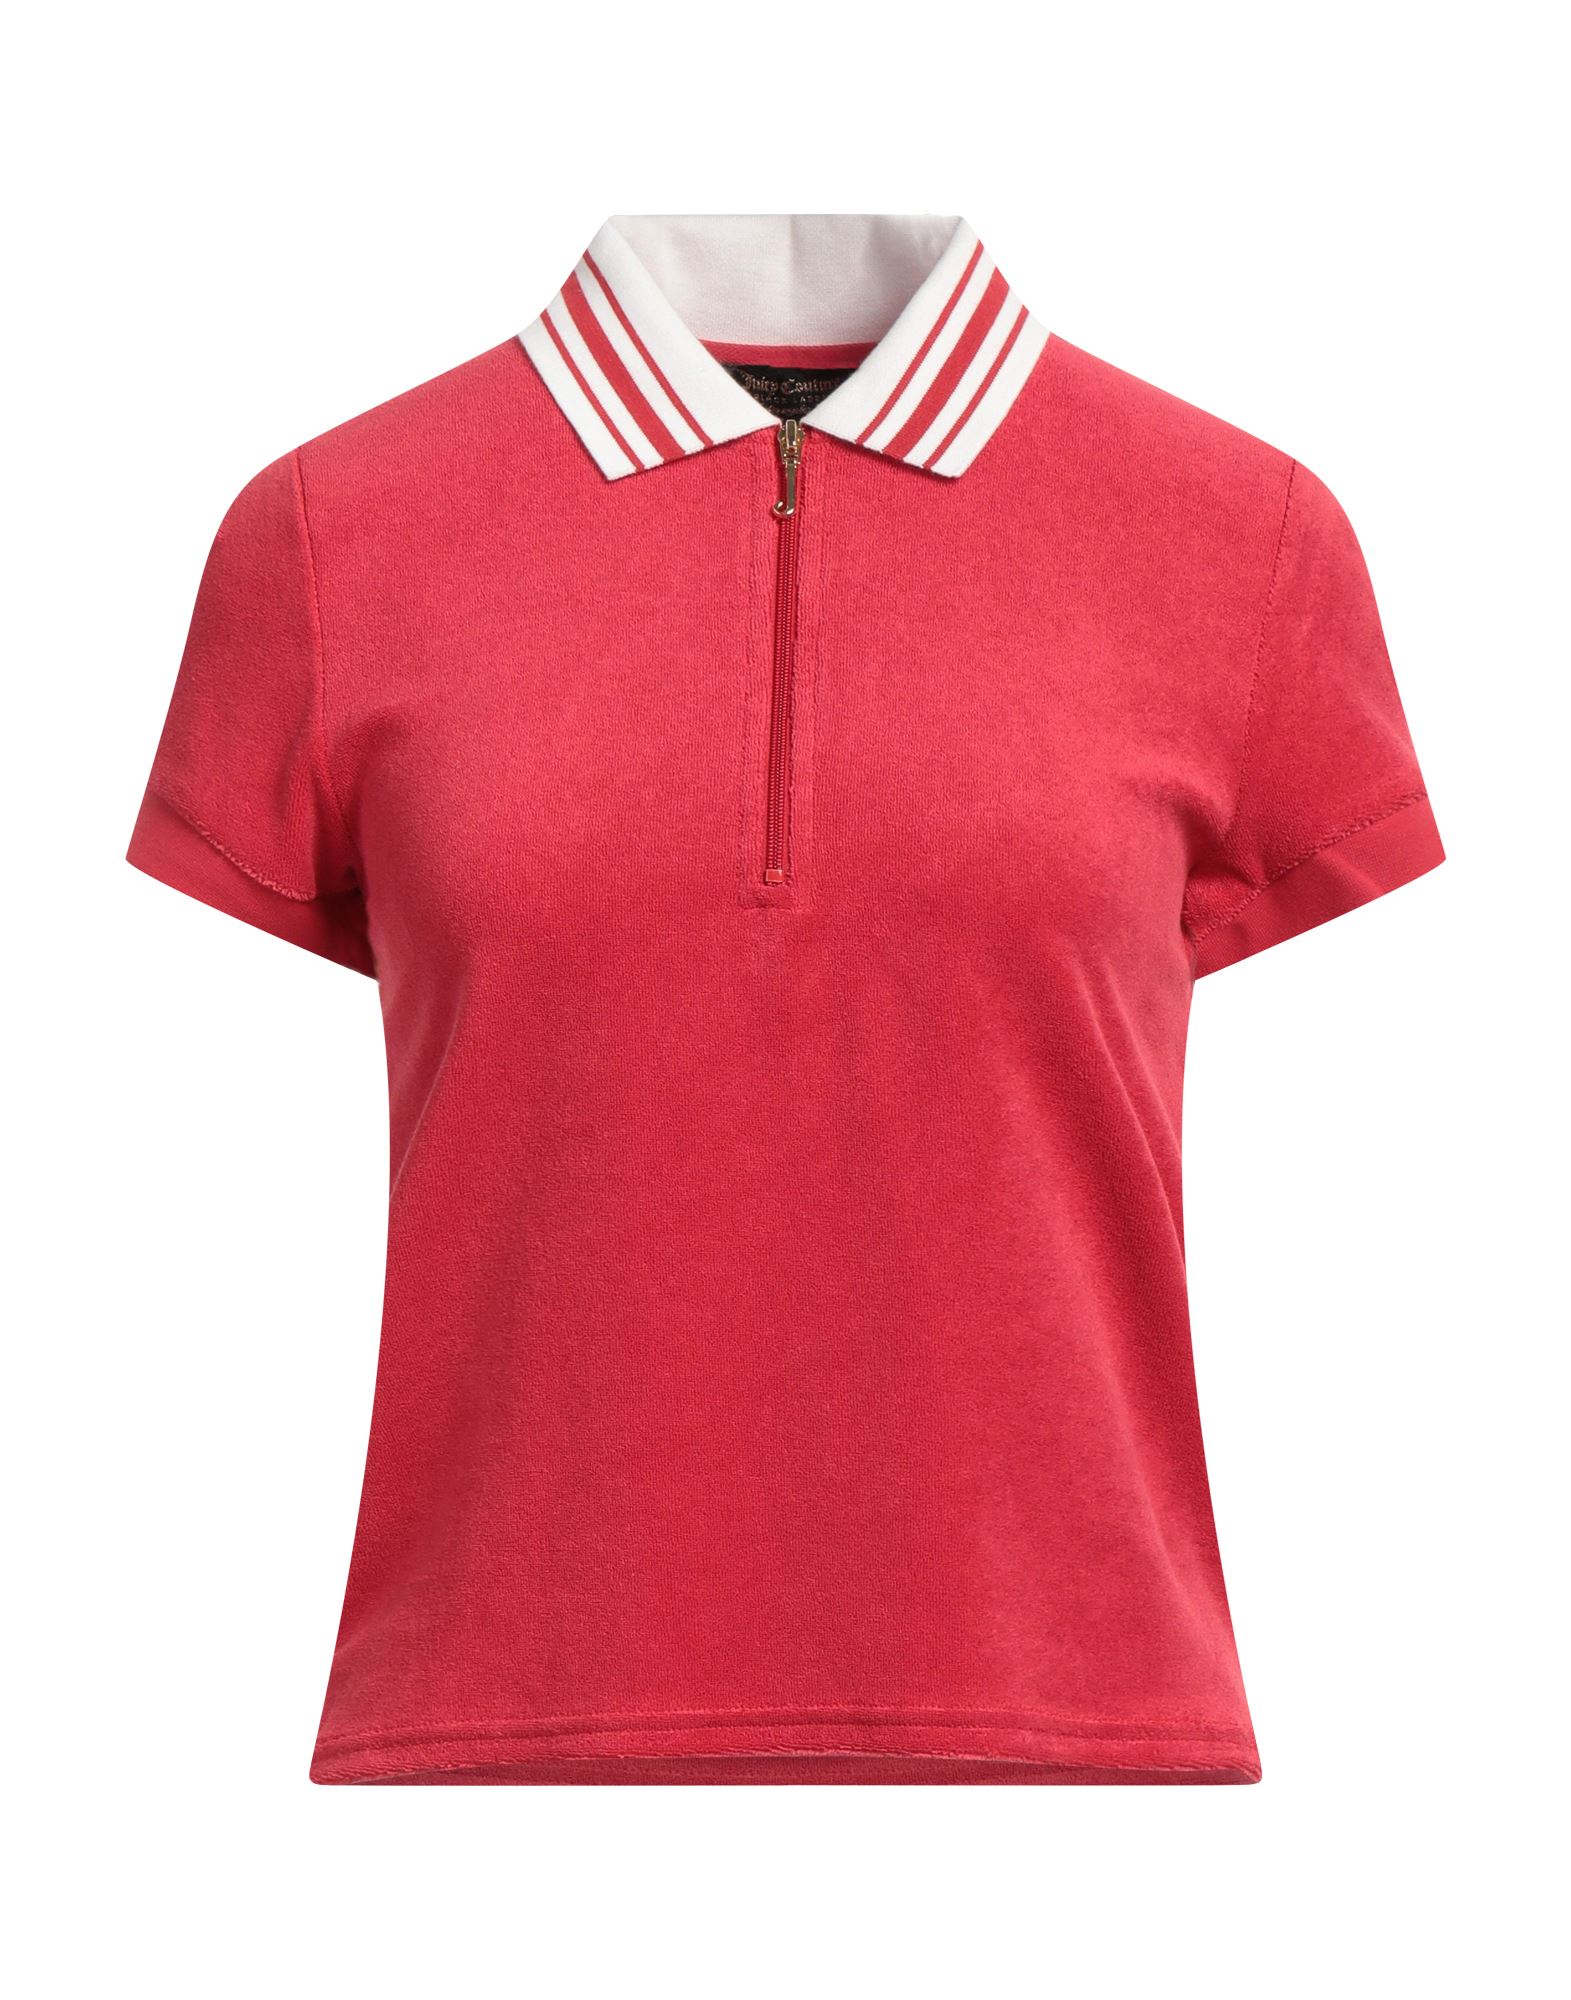 JUICY COUTURE Poloshirt Damen Rot von JUICY COUTURE